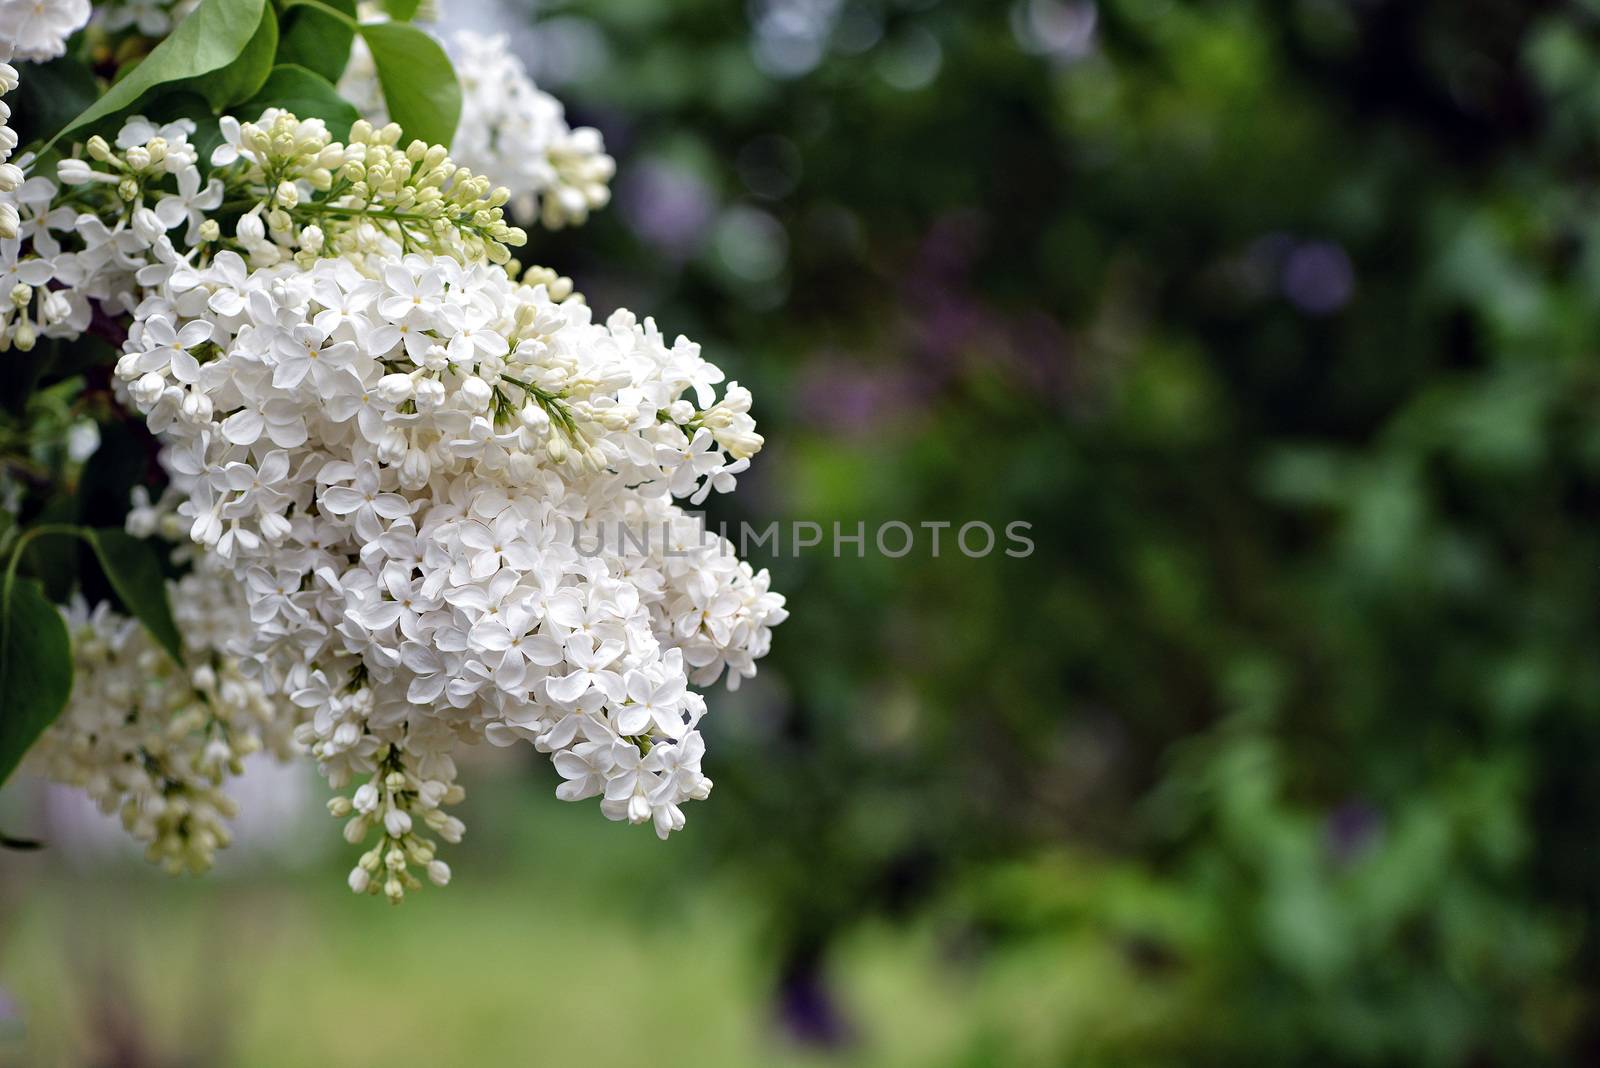 Selective focus close-up abstract photography. Lilac blooms in the garden.